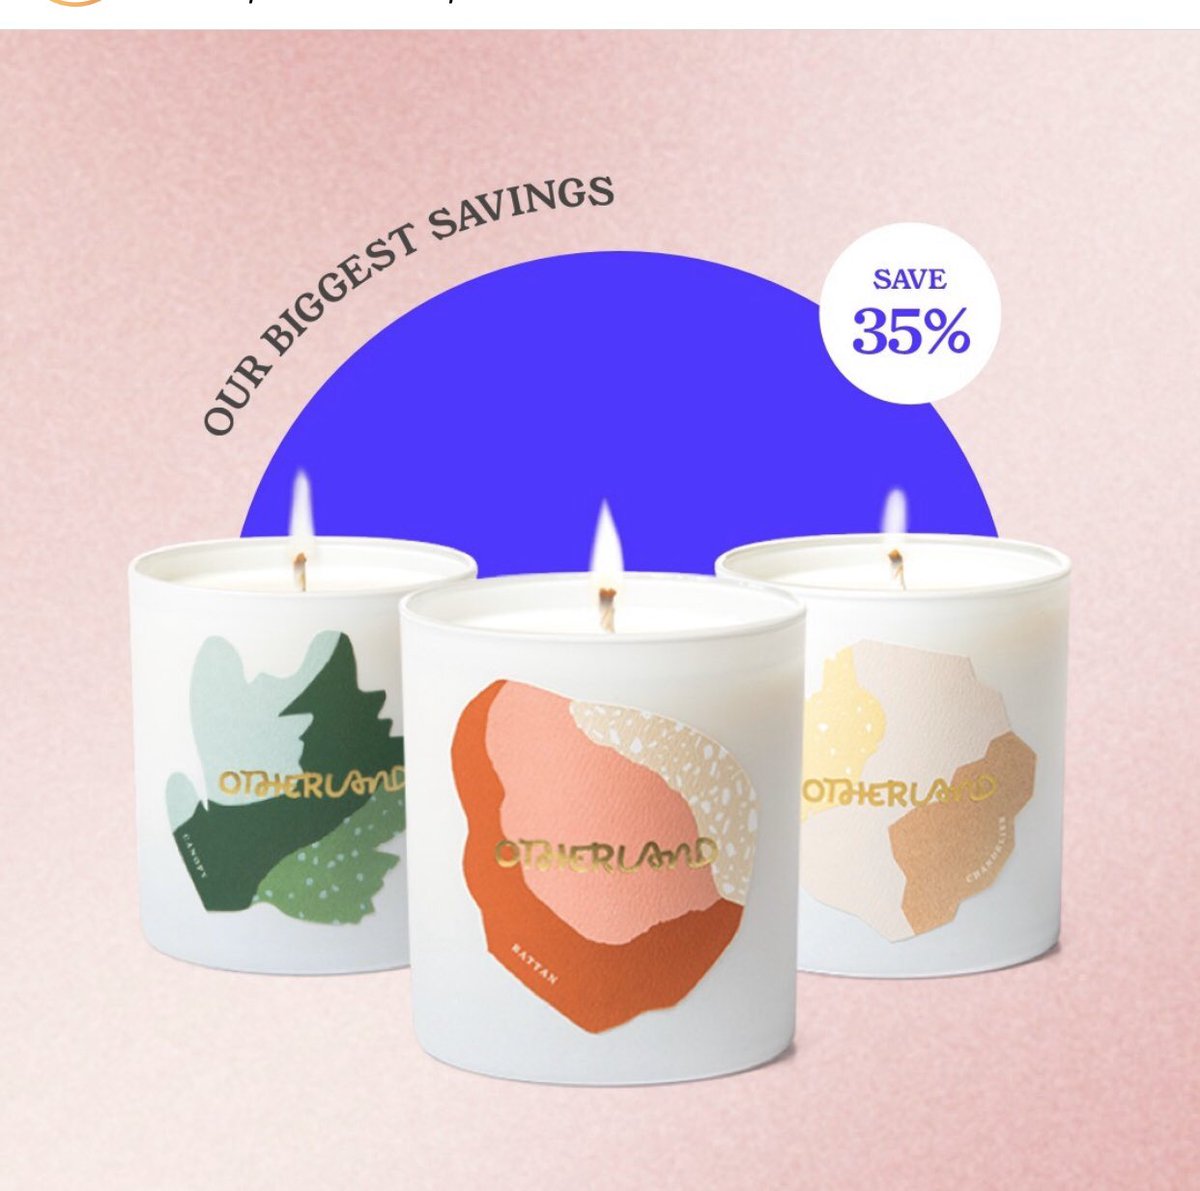  @glossier is offering 25% off. @birchbox is offering 30% off.-Olipop is offering 25% off with code OHYEAH. @otherlandhome is offering a hot deal: 35% off.-Feat is offering 30% off. @cardon is offering 35% off on your first order and 15% on every order afterward.